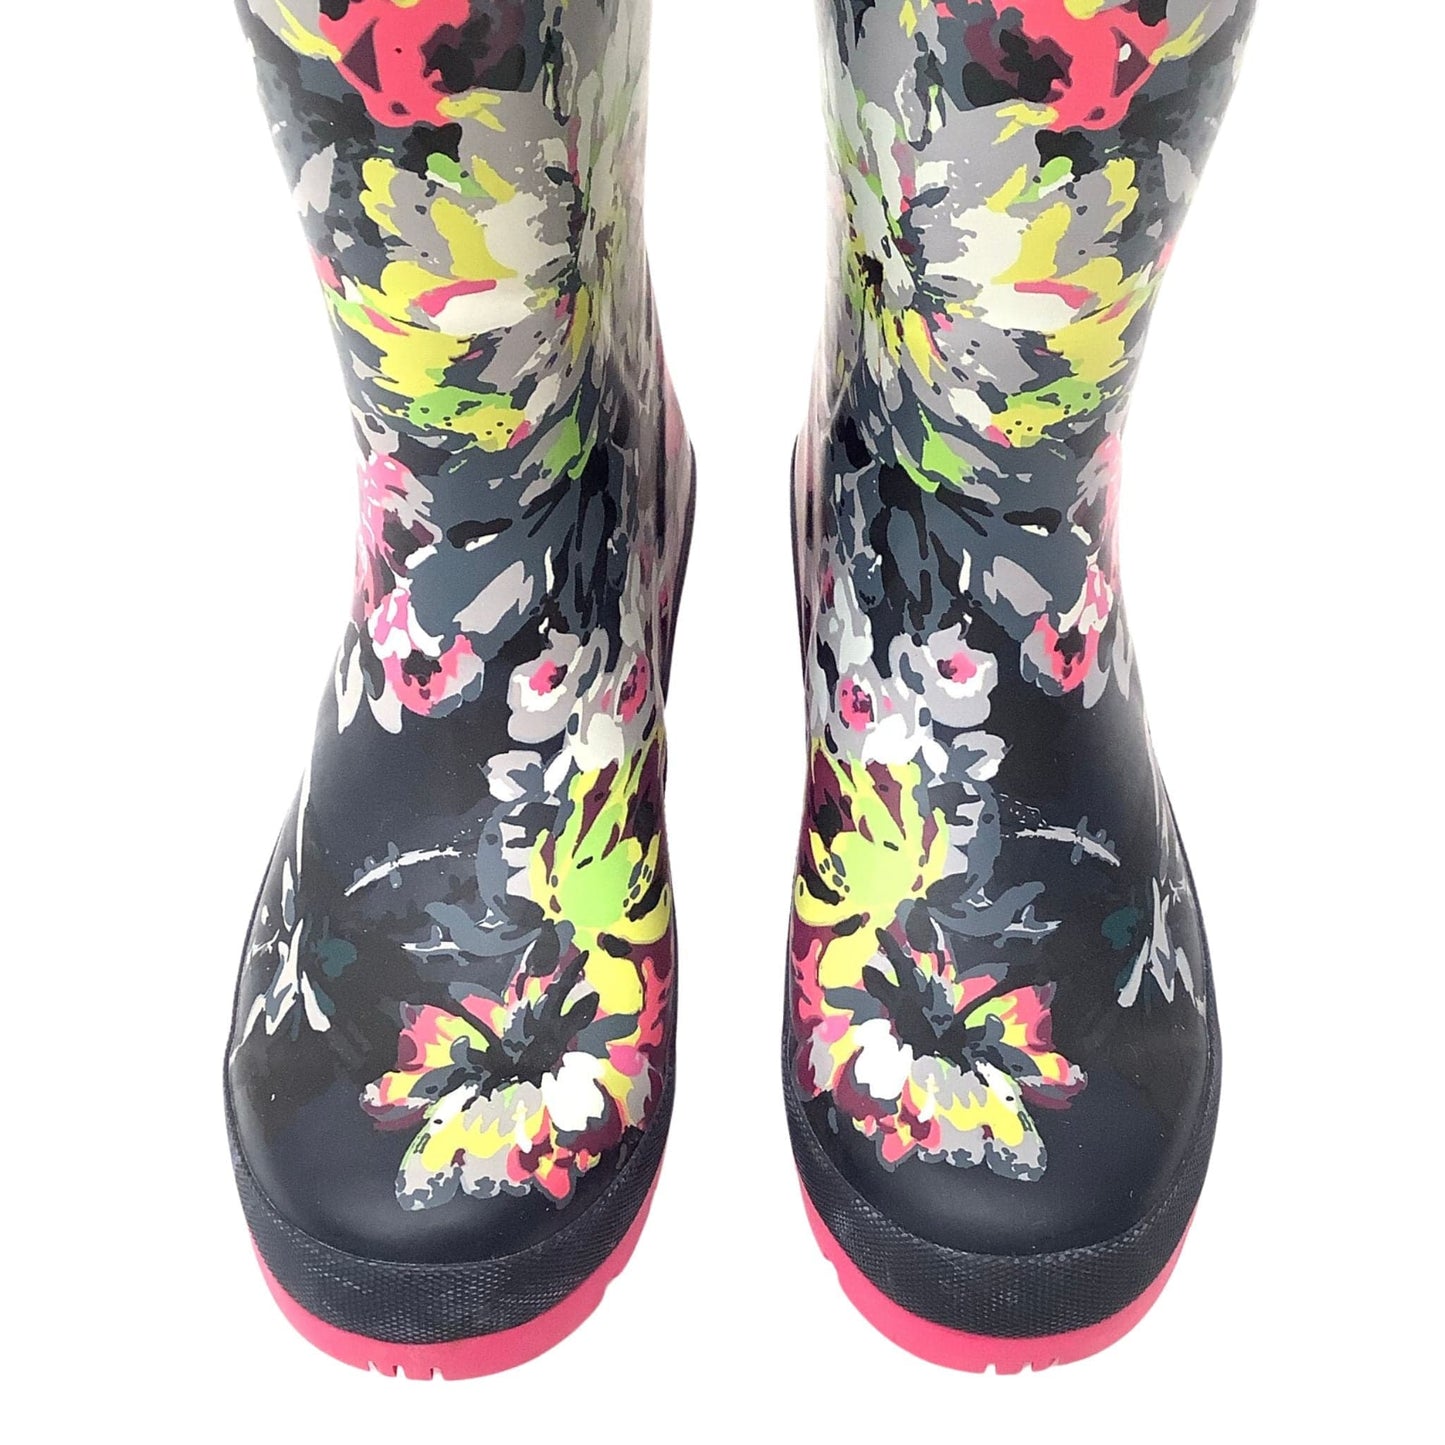 Joules Tall Rain Boots 6.5 / Multi / Y2K - Now